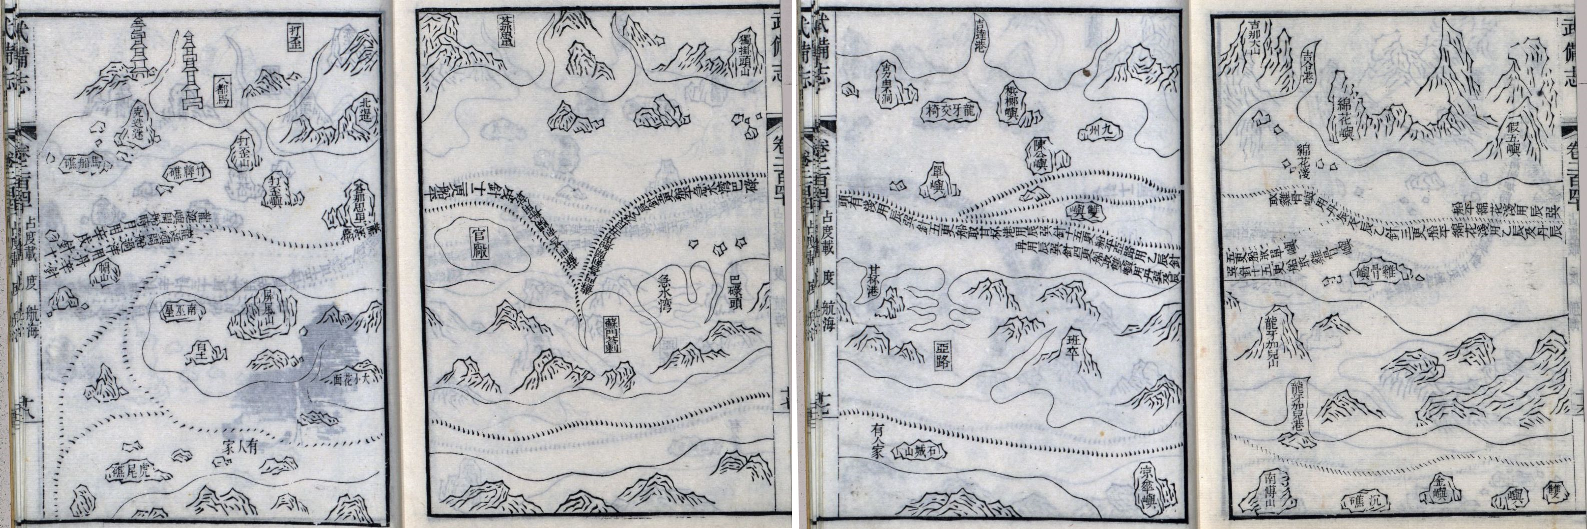 Wu bei zhi 1644 map of Admiral Zheng He's Voyage, page pairs 18-17 (15-16 of 20)